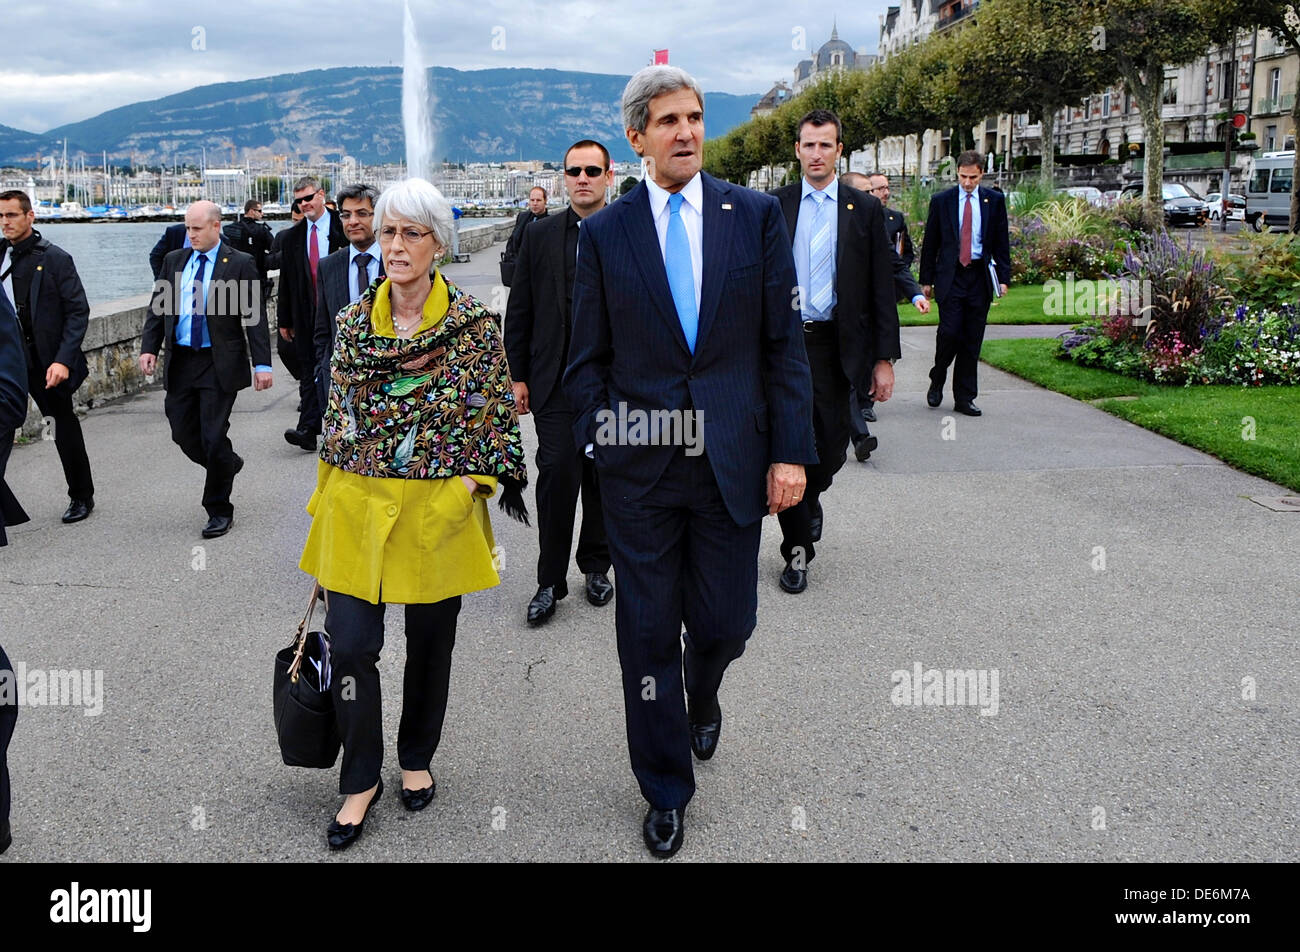 US Secretary of State John Kerry and Undersecretary of State for Political Affairs Wendy Sherman take a walk along Lake Geneva before meetings with Russian officials on Syrian chemical weapons September 12, 2013 in Geneva, Switzerland. Stock Photo